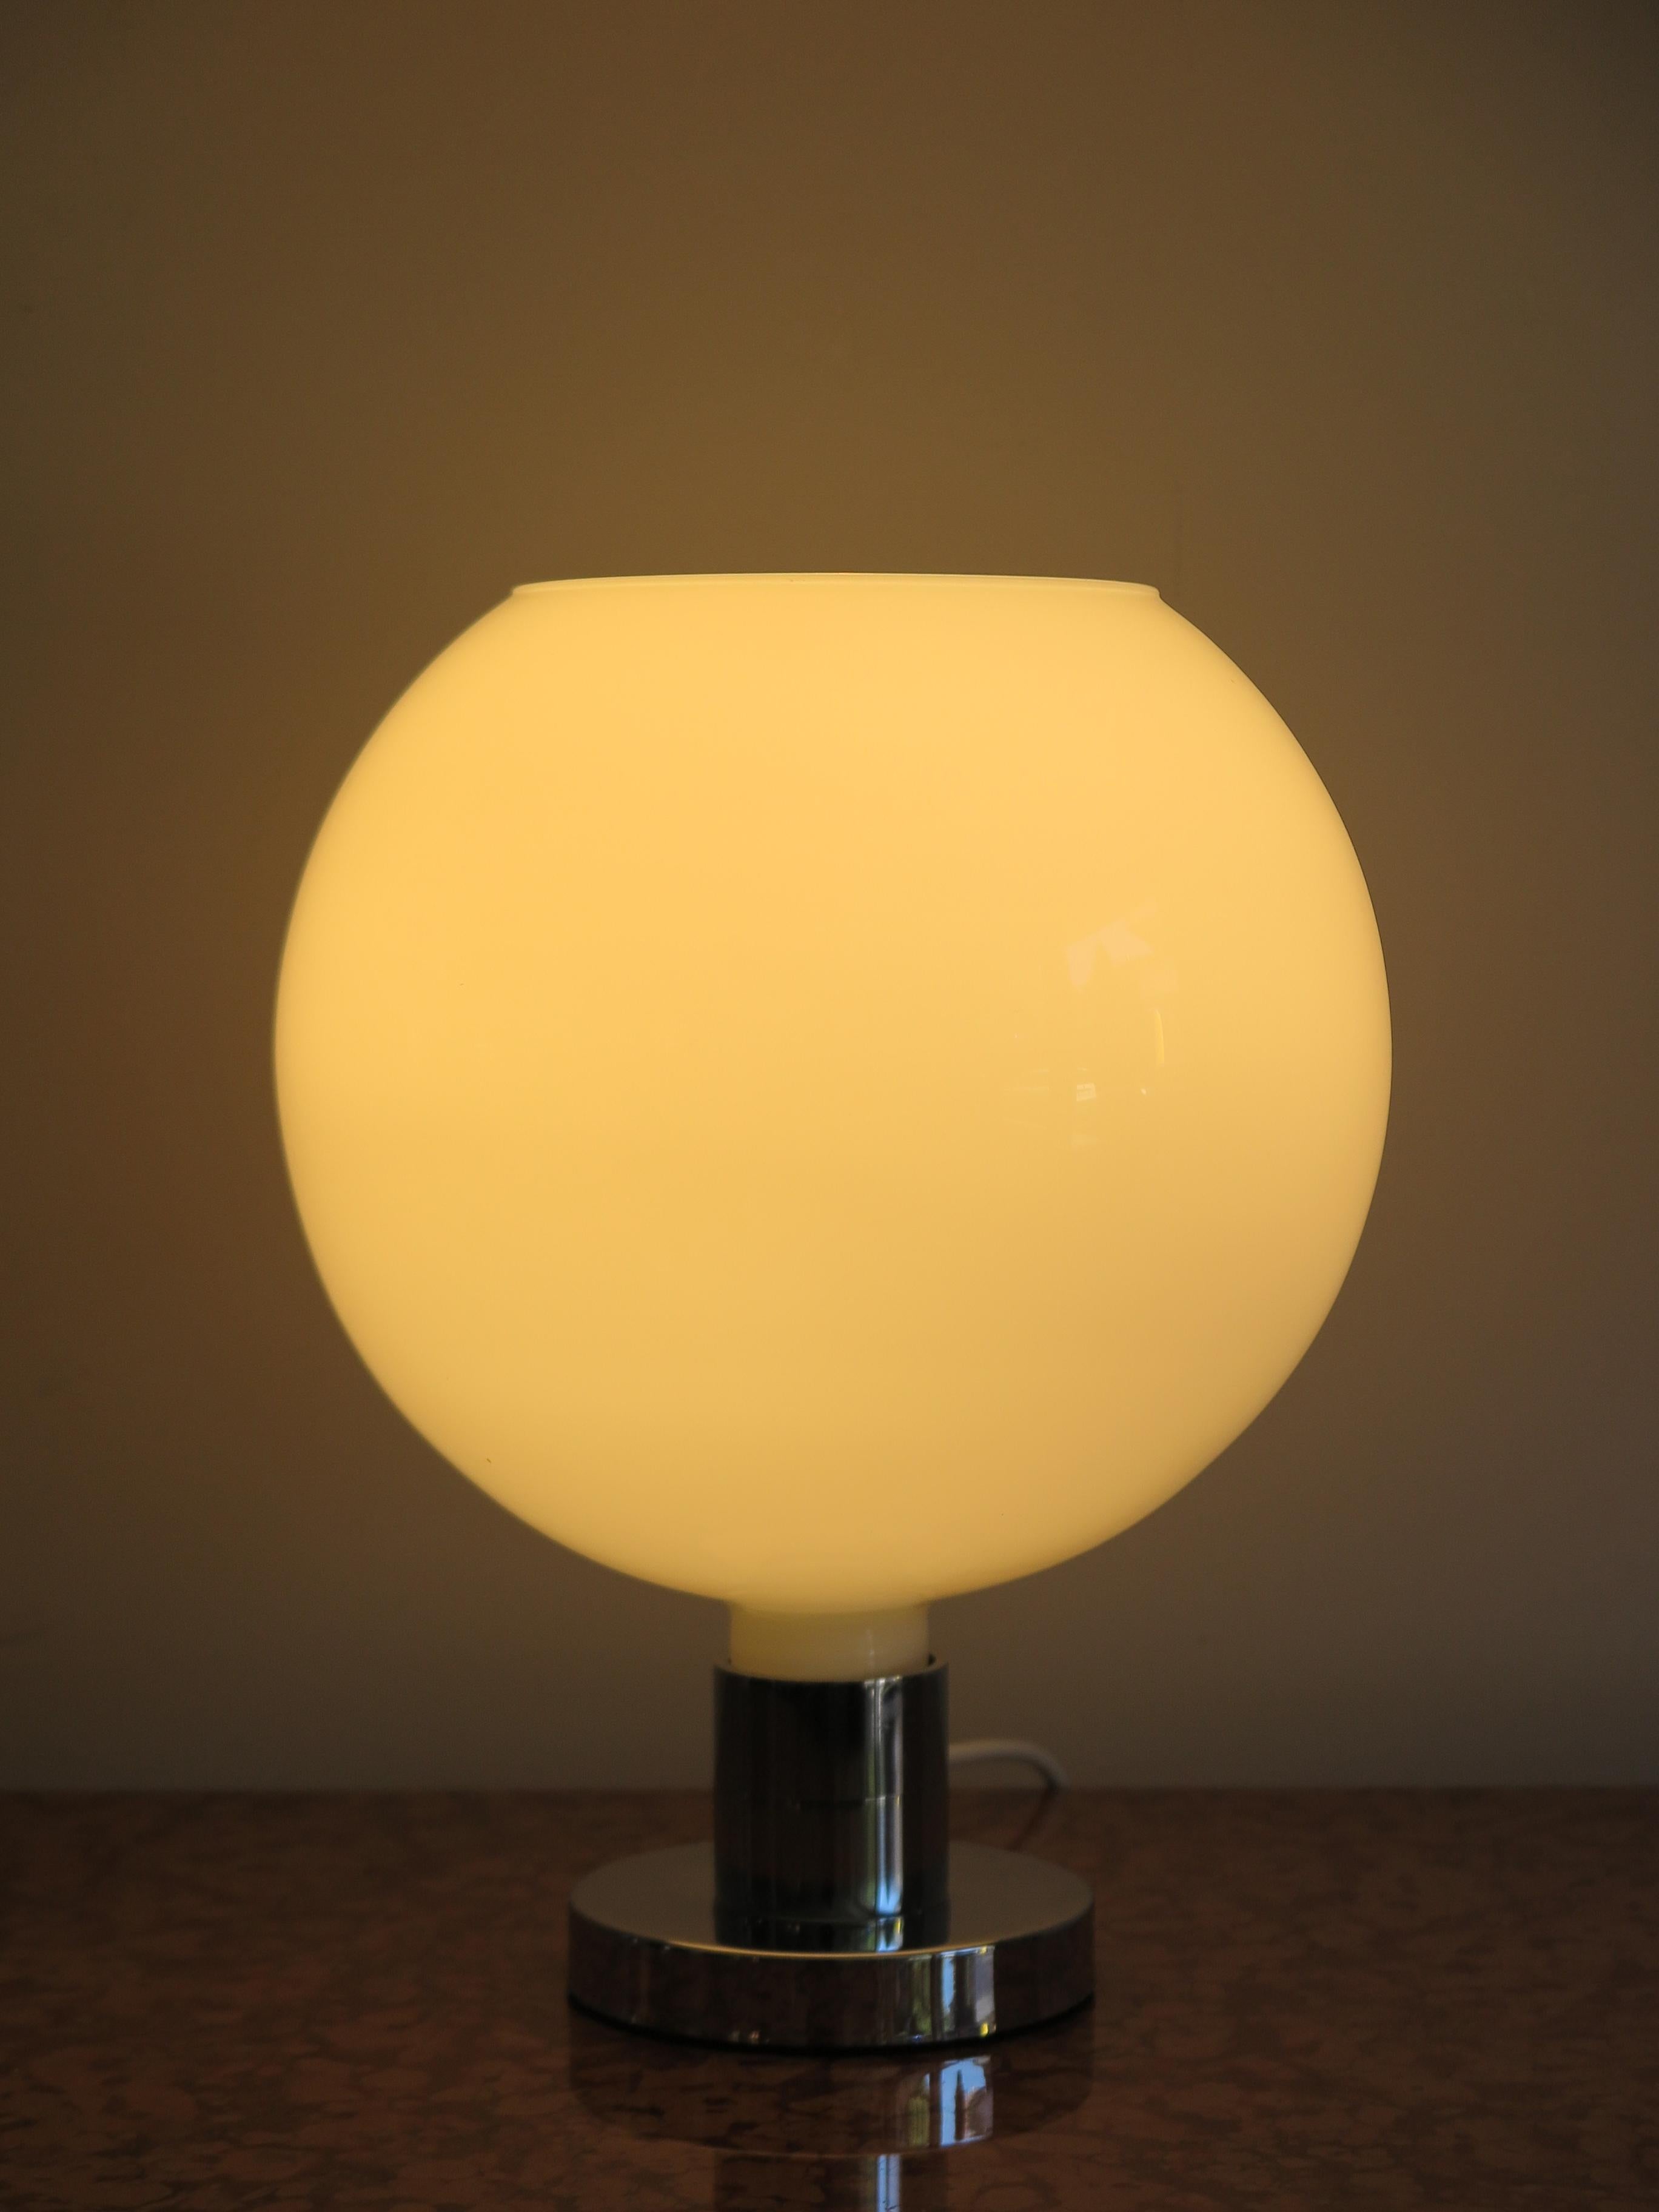 Italian Mid-Century Modern design table lamp AM4 serie designed by Franco Albini, Franca Helgh, Antonio Piva and produced by Sirrah, made up of opal glass sphere and chromed metal base, with original paper box, 1960s.